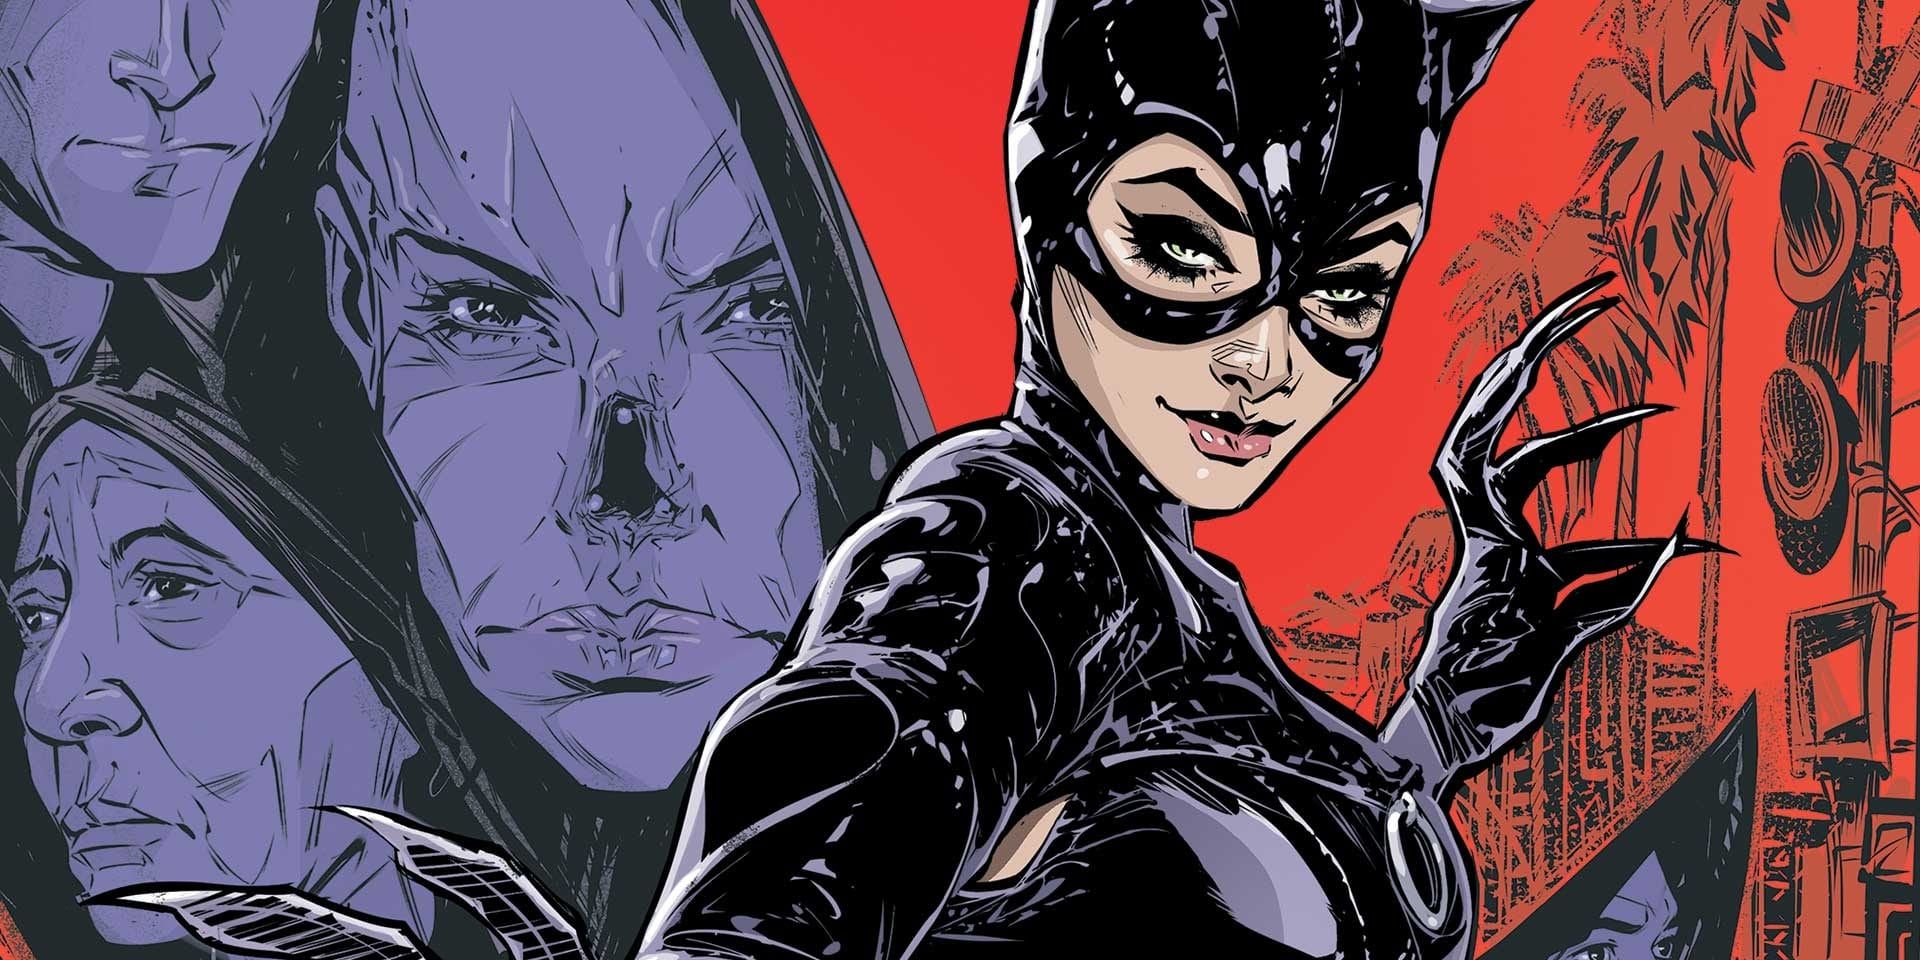 Catwoman poses with Silver Sable in the background